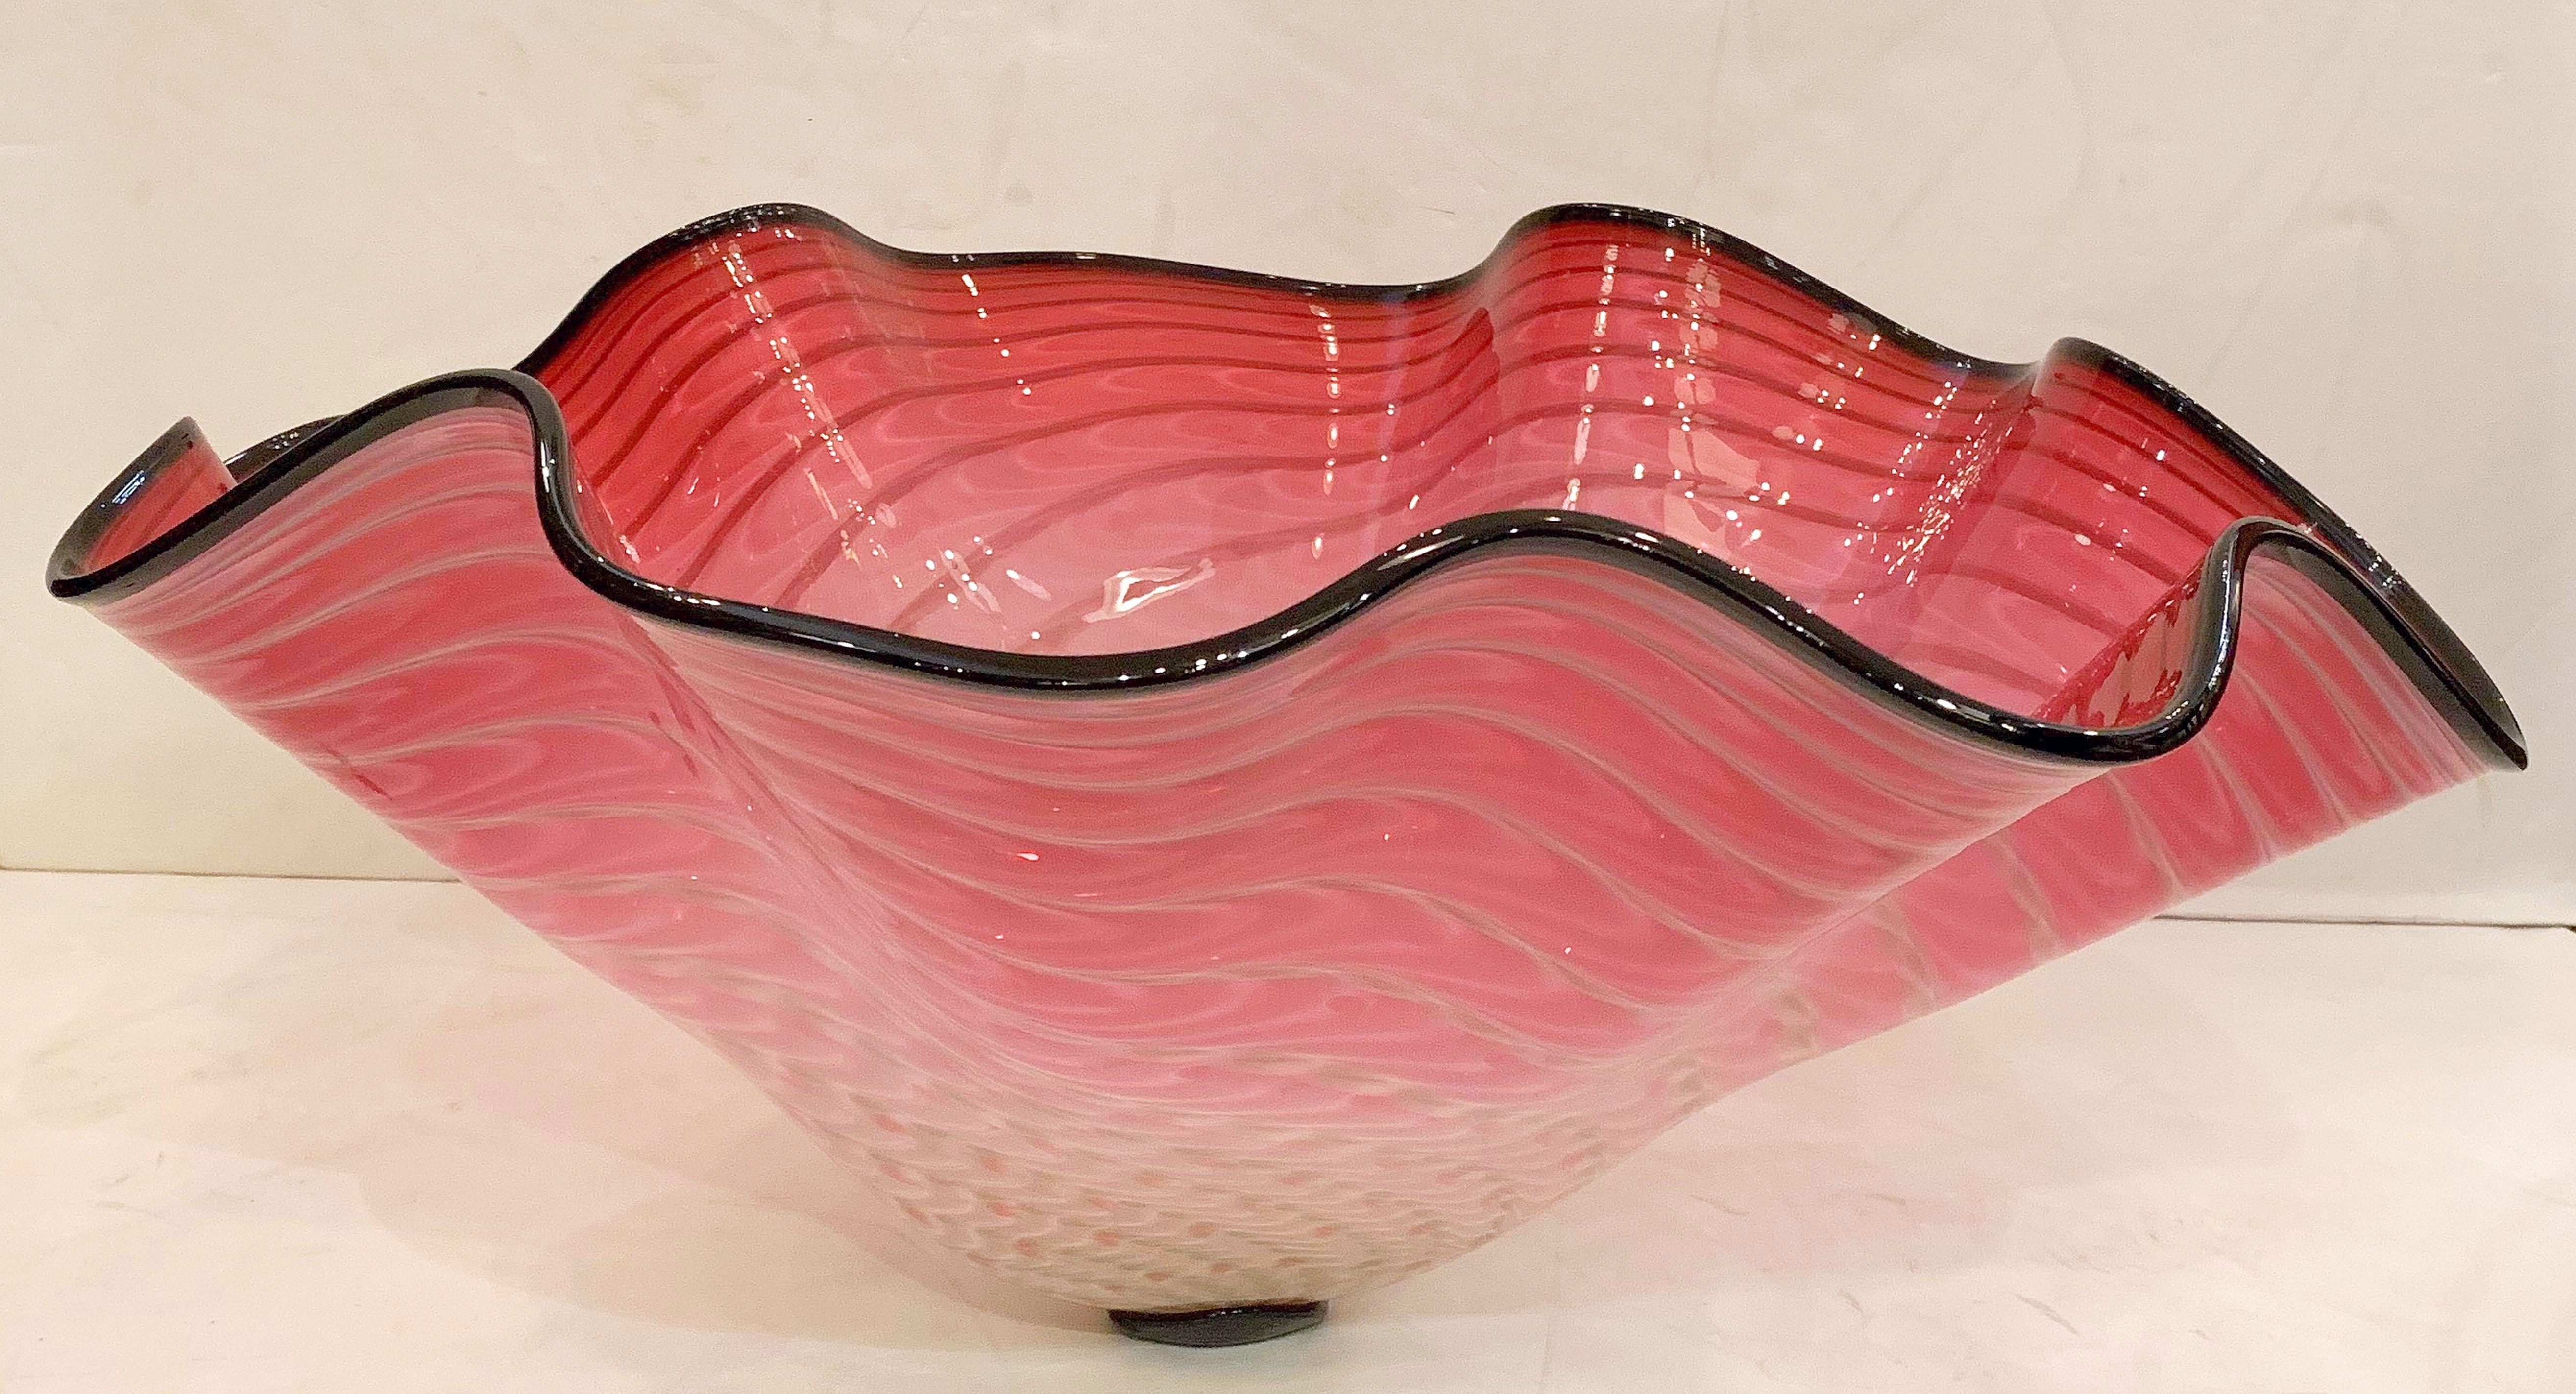 A beautiful large art glass bowl featuring a fused black glass rim with a ruffled edge, in the style or manner of Dale Chihuly.

Signed on base.

Dimensions of diameter vary from 22 to 26 inches.